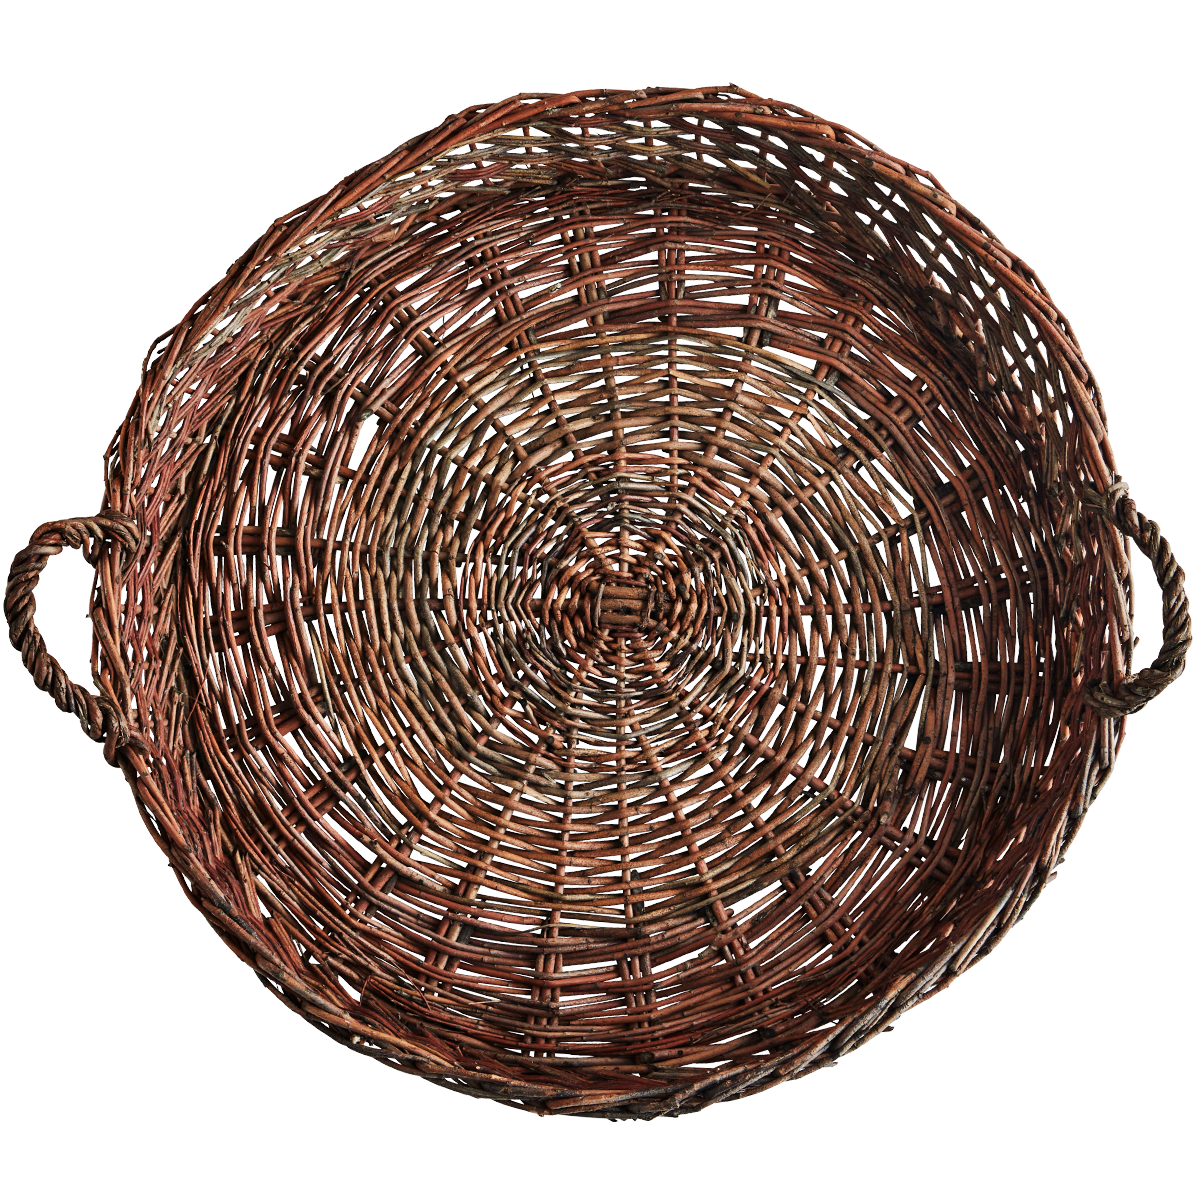 Willow tray w/ handles